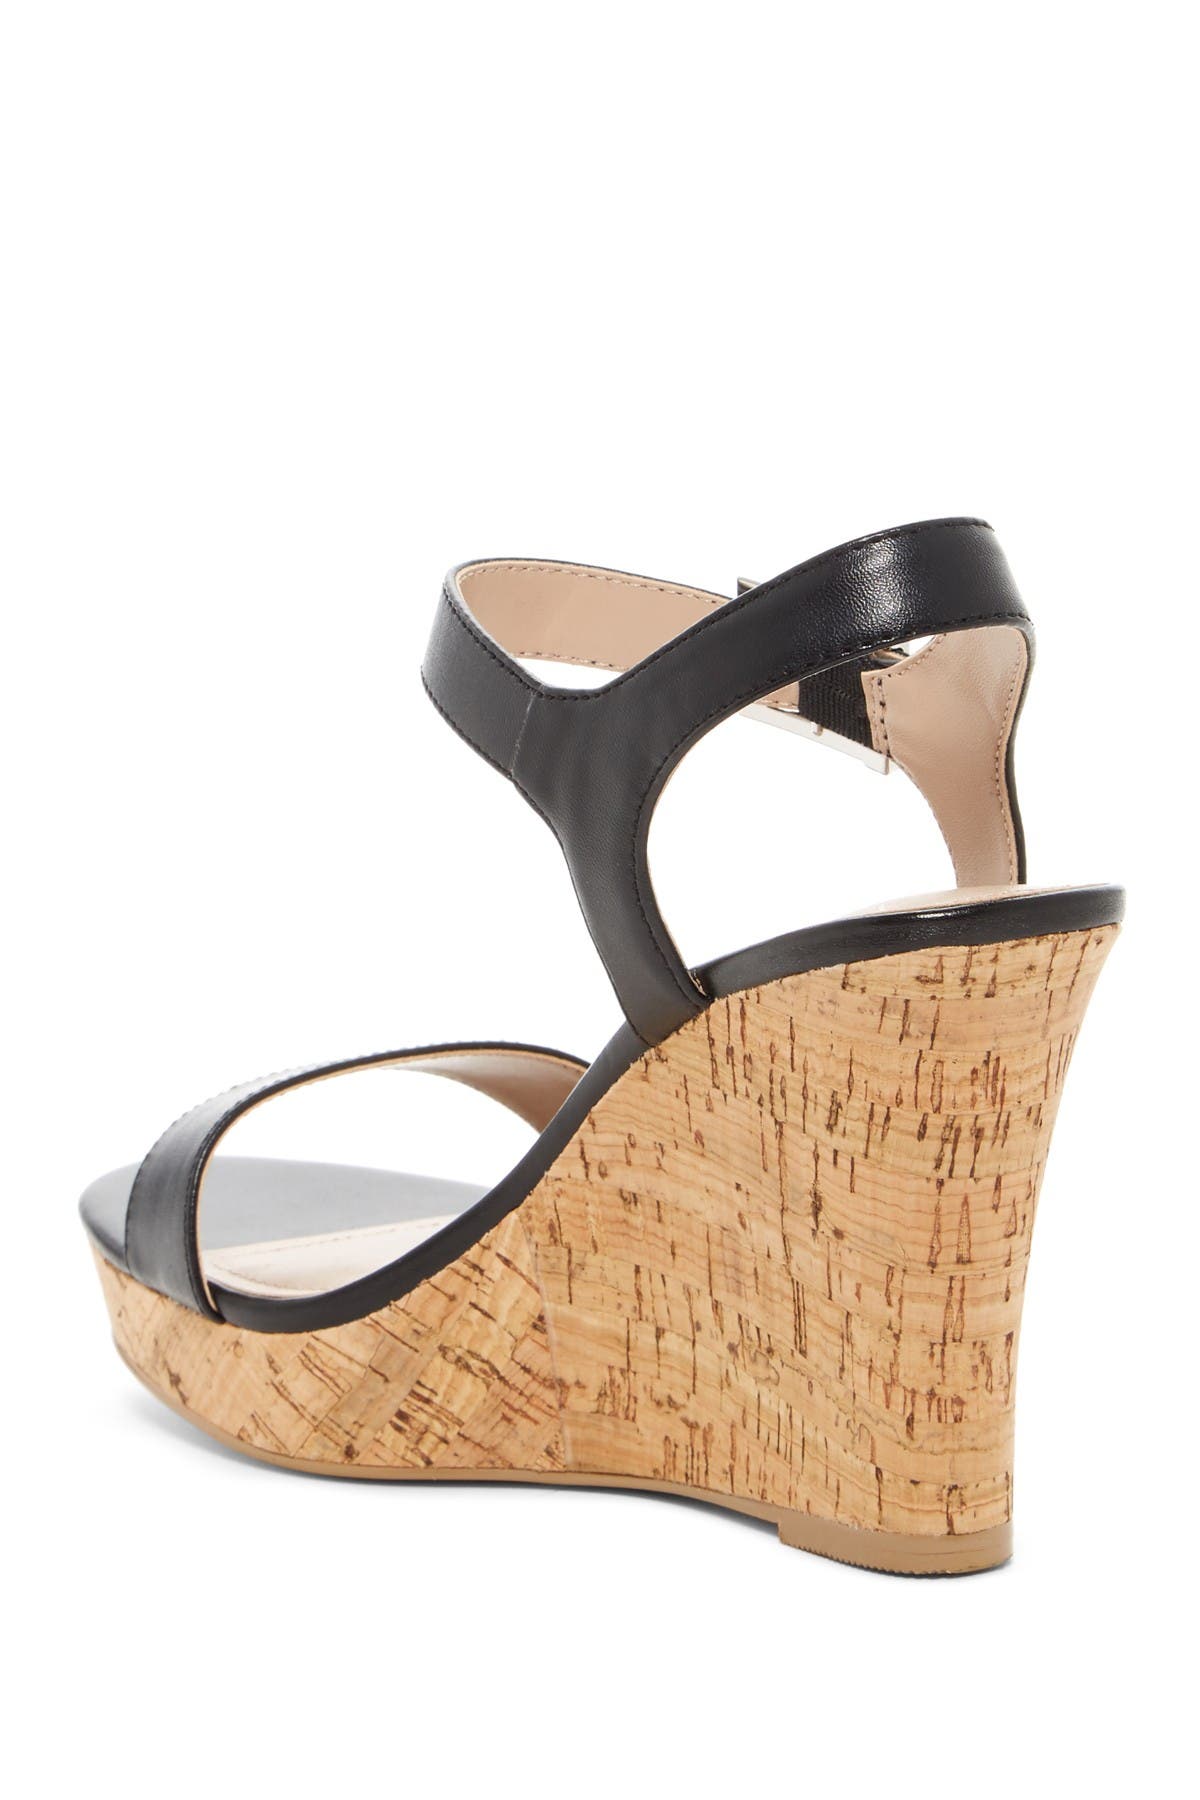 charles by charles david ankle strap wedge sandals